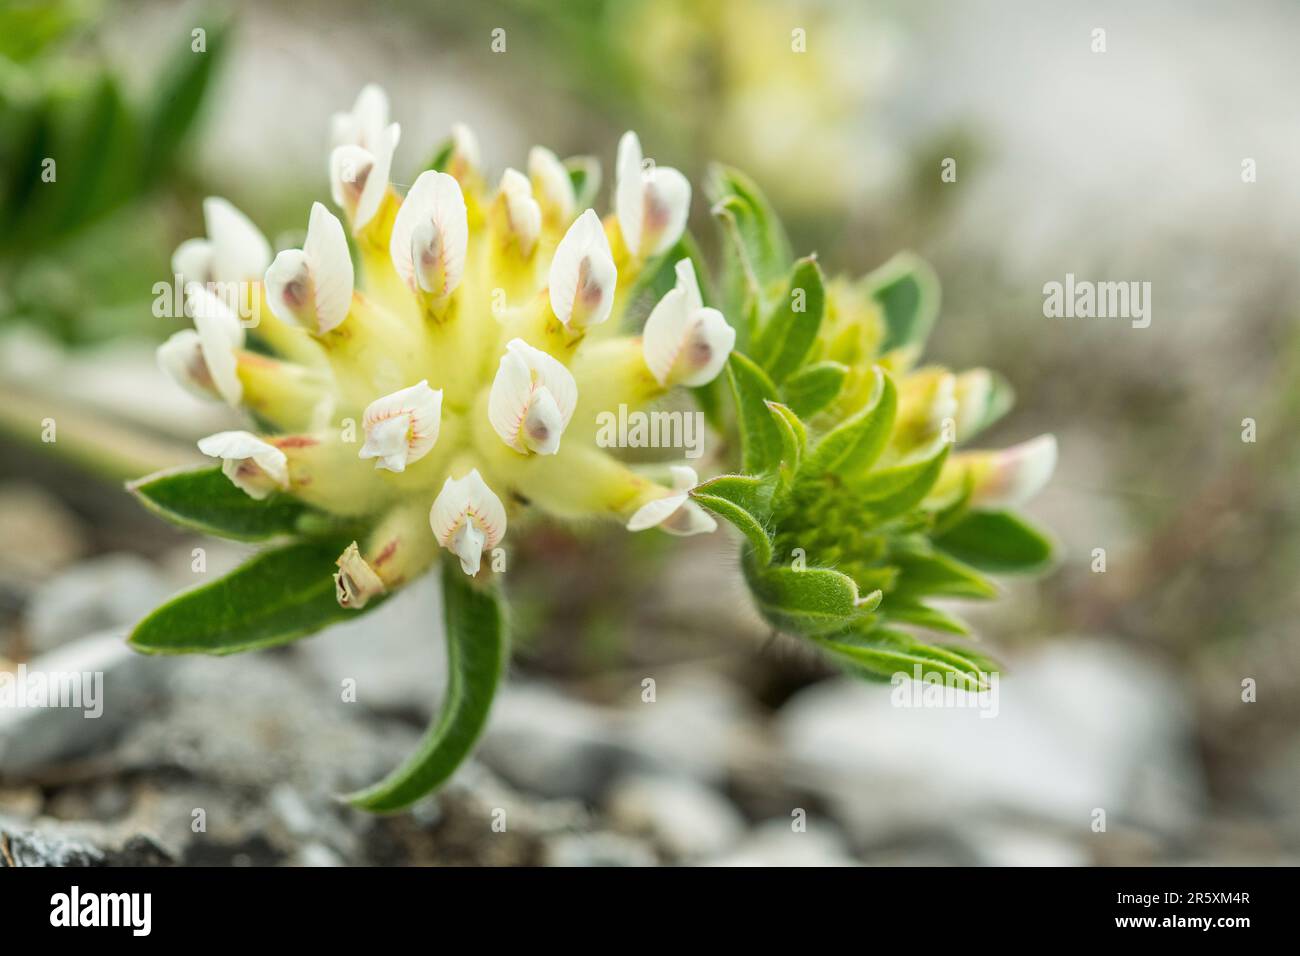 Anthyllis vulneraria (subsp alpestris), the common kidneyvetch, kidney vetch or woundwort is a medicinal plant native to Europe. Stock Photo